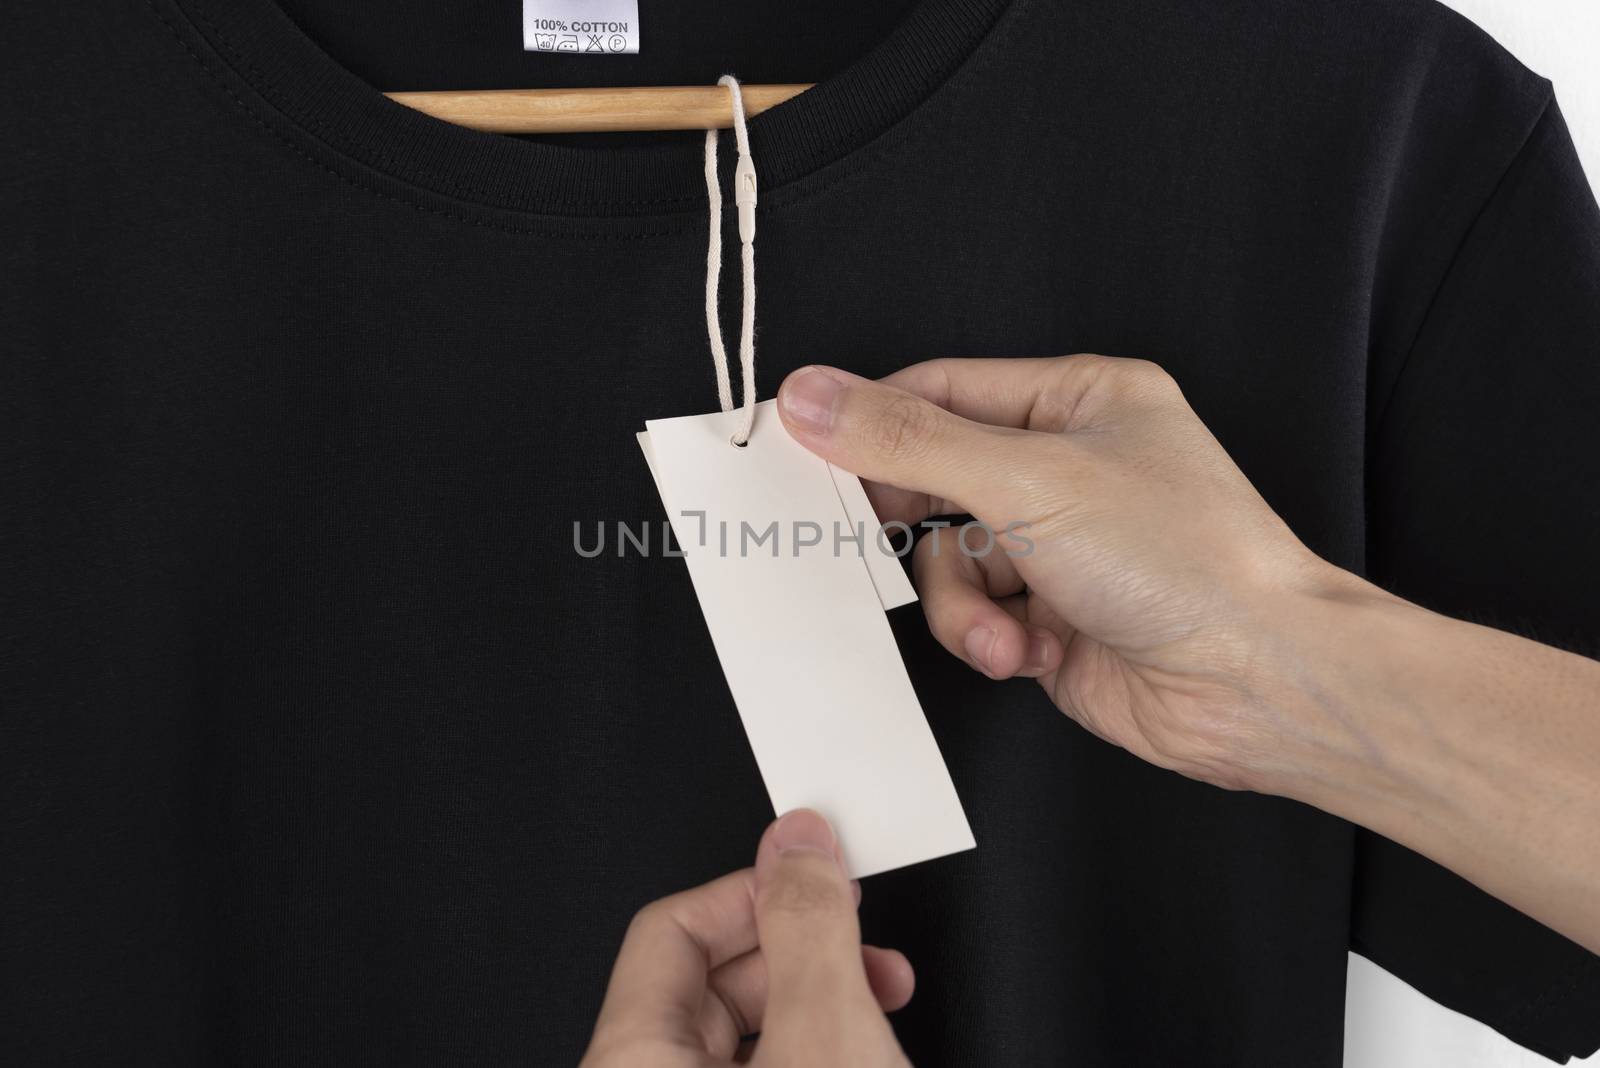 Mockup blank black t-shirt and blank label tag for advertising.